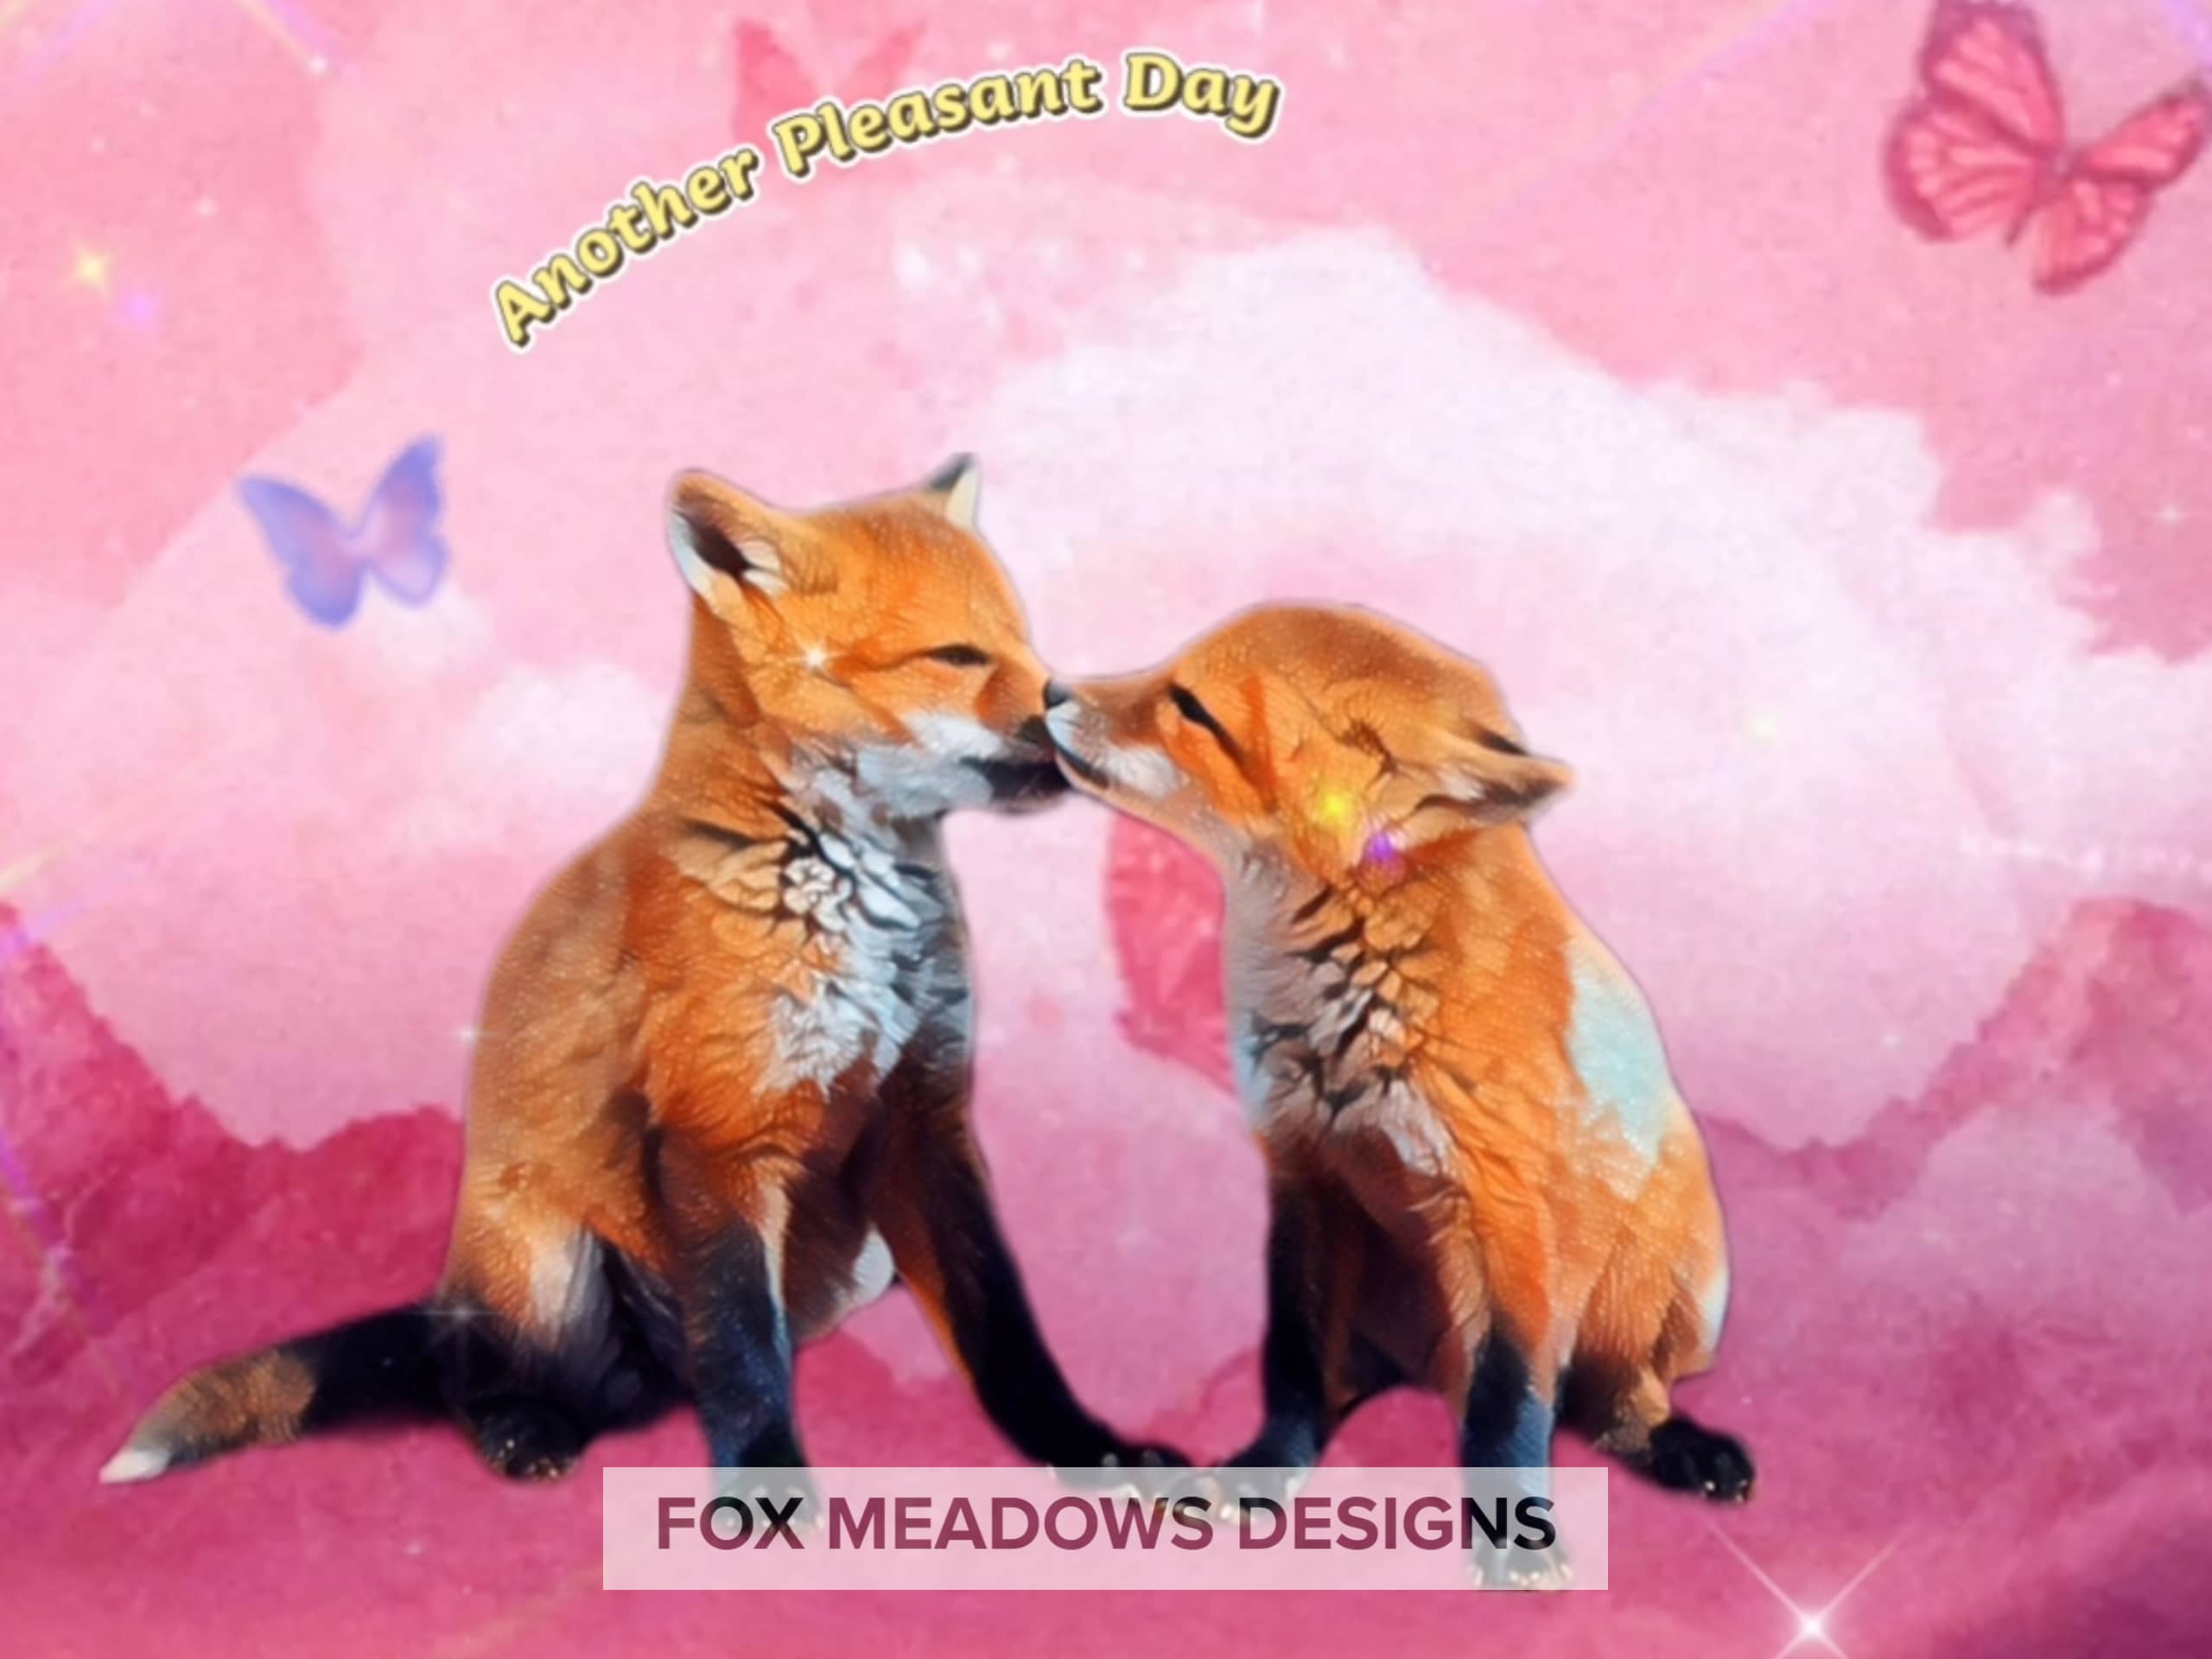 Sweet Fox Kits for Your Phone: Free Live Fox Wallpaper